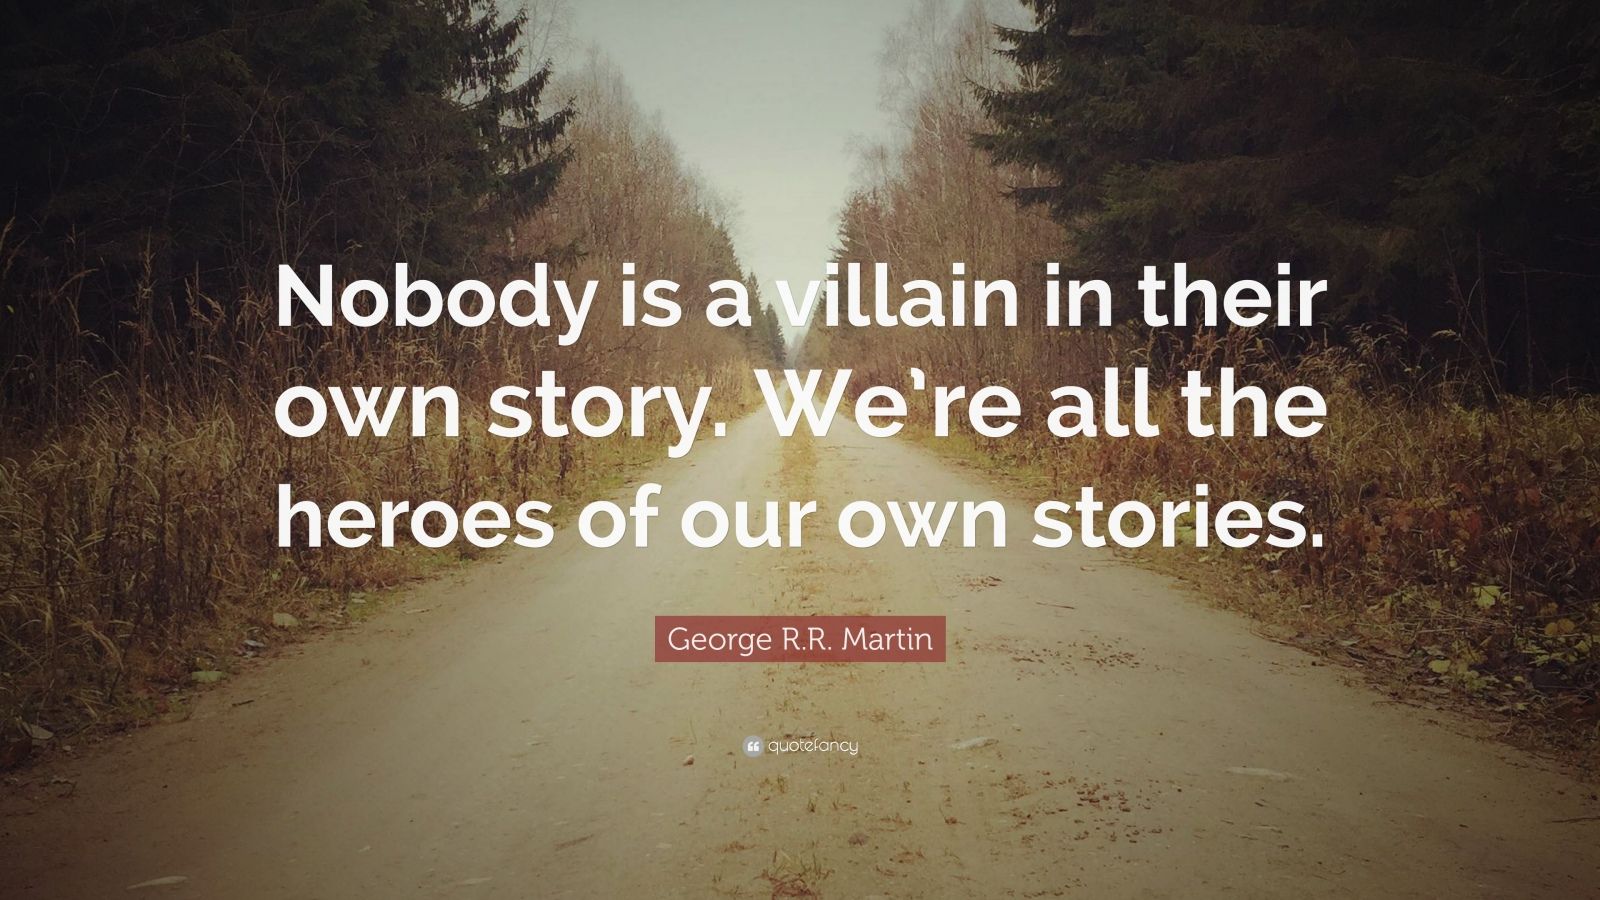 George R.R. Martin Quote: “Nobody is a villain in their own story. We’re all the heroes of our